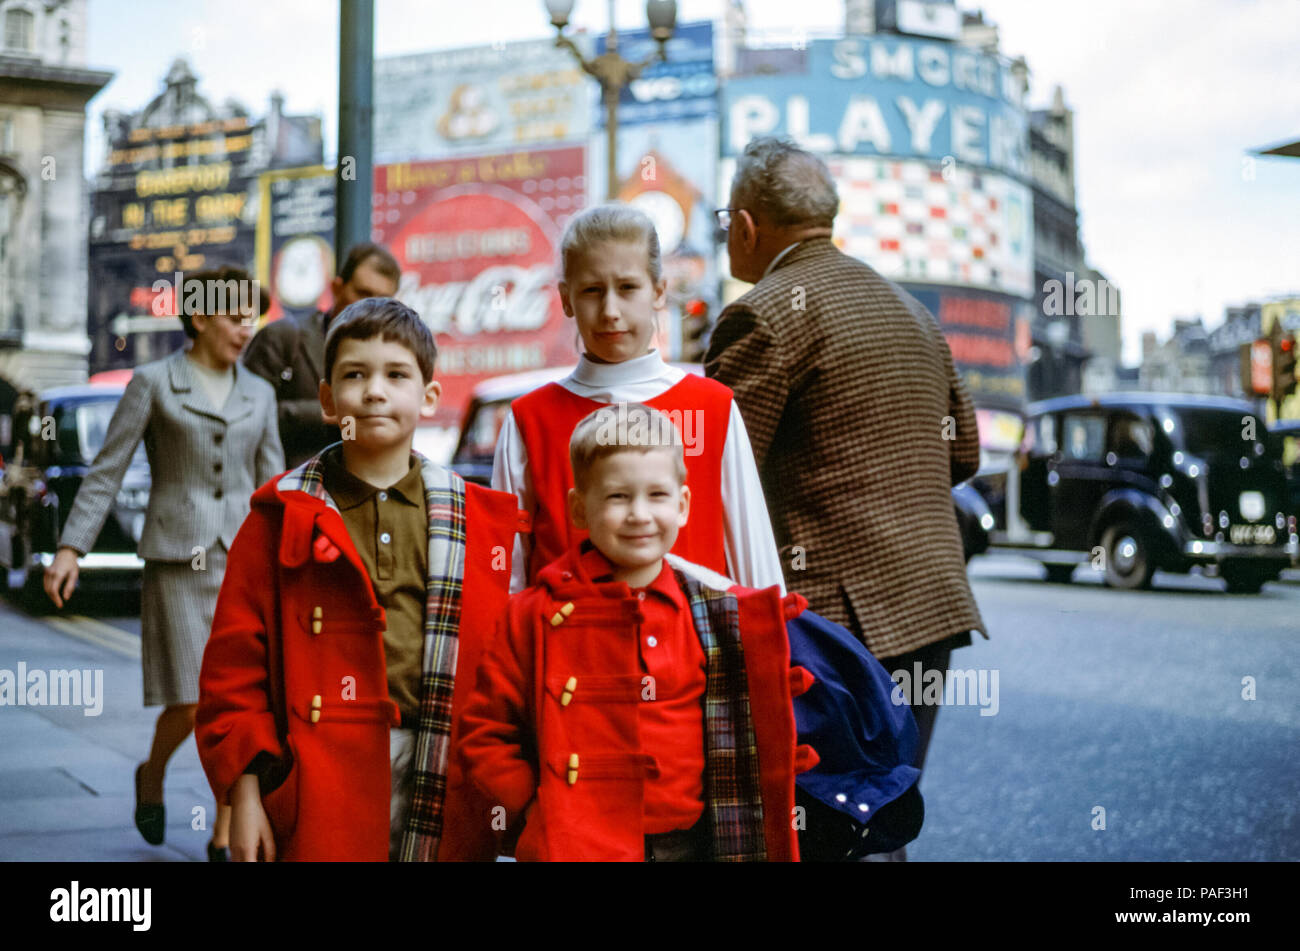 Three children in a family portrait, two boys and a girl wearing red in Piccadilly Circus, London, England in the 1960s. The boys are wearing matching red duffel coats. Piccadilly Theatre advertises the play Barefoot in the Park with neon advertisements for Coca Cola and Players cigarettes Stock Photo